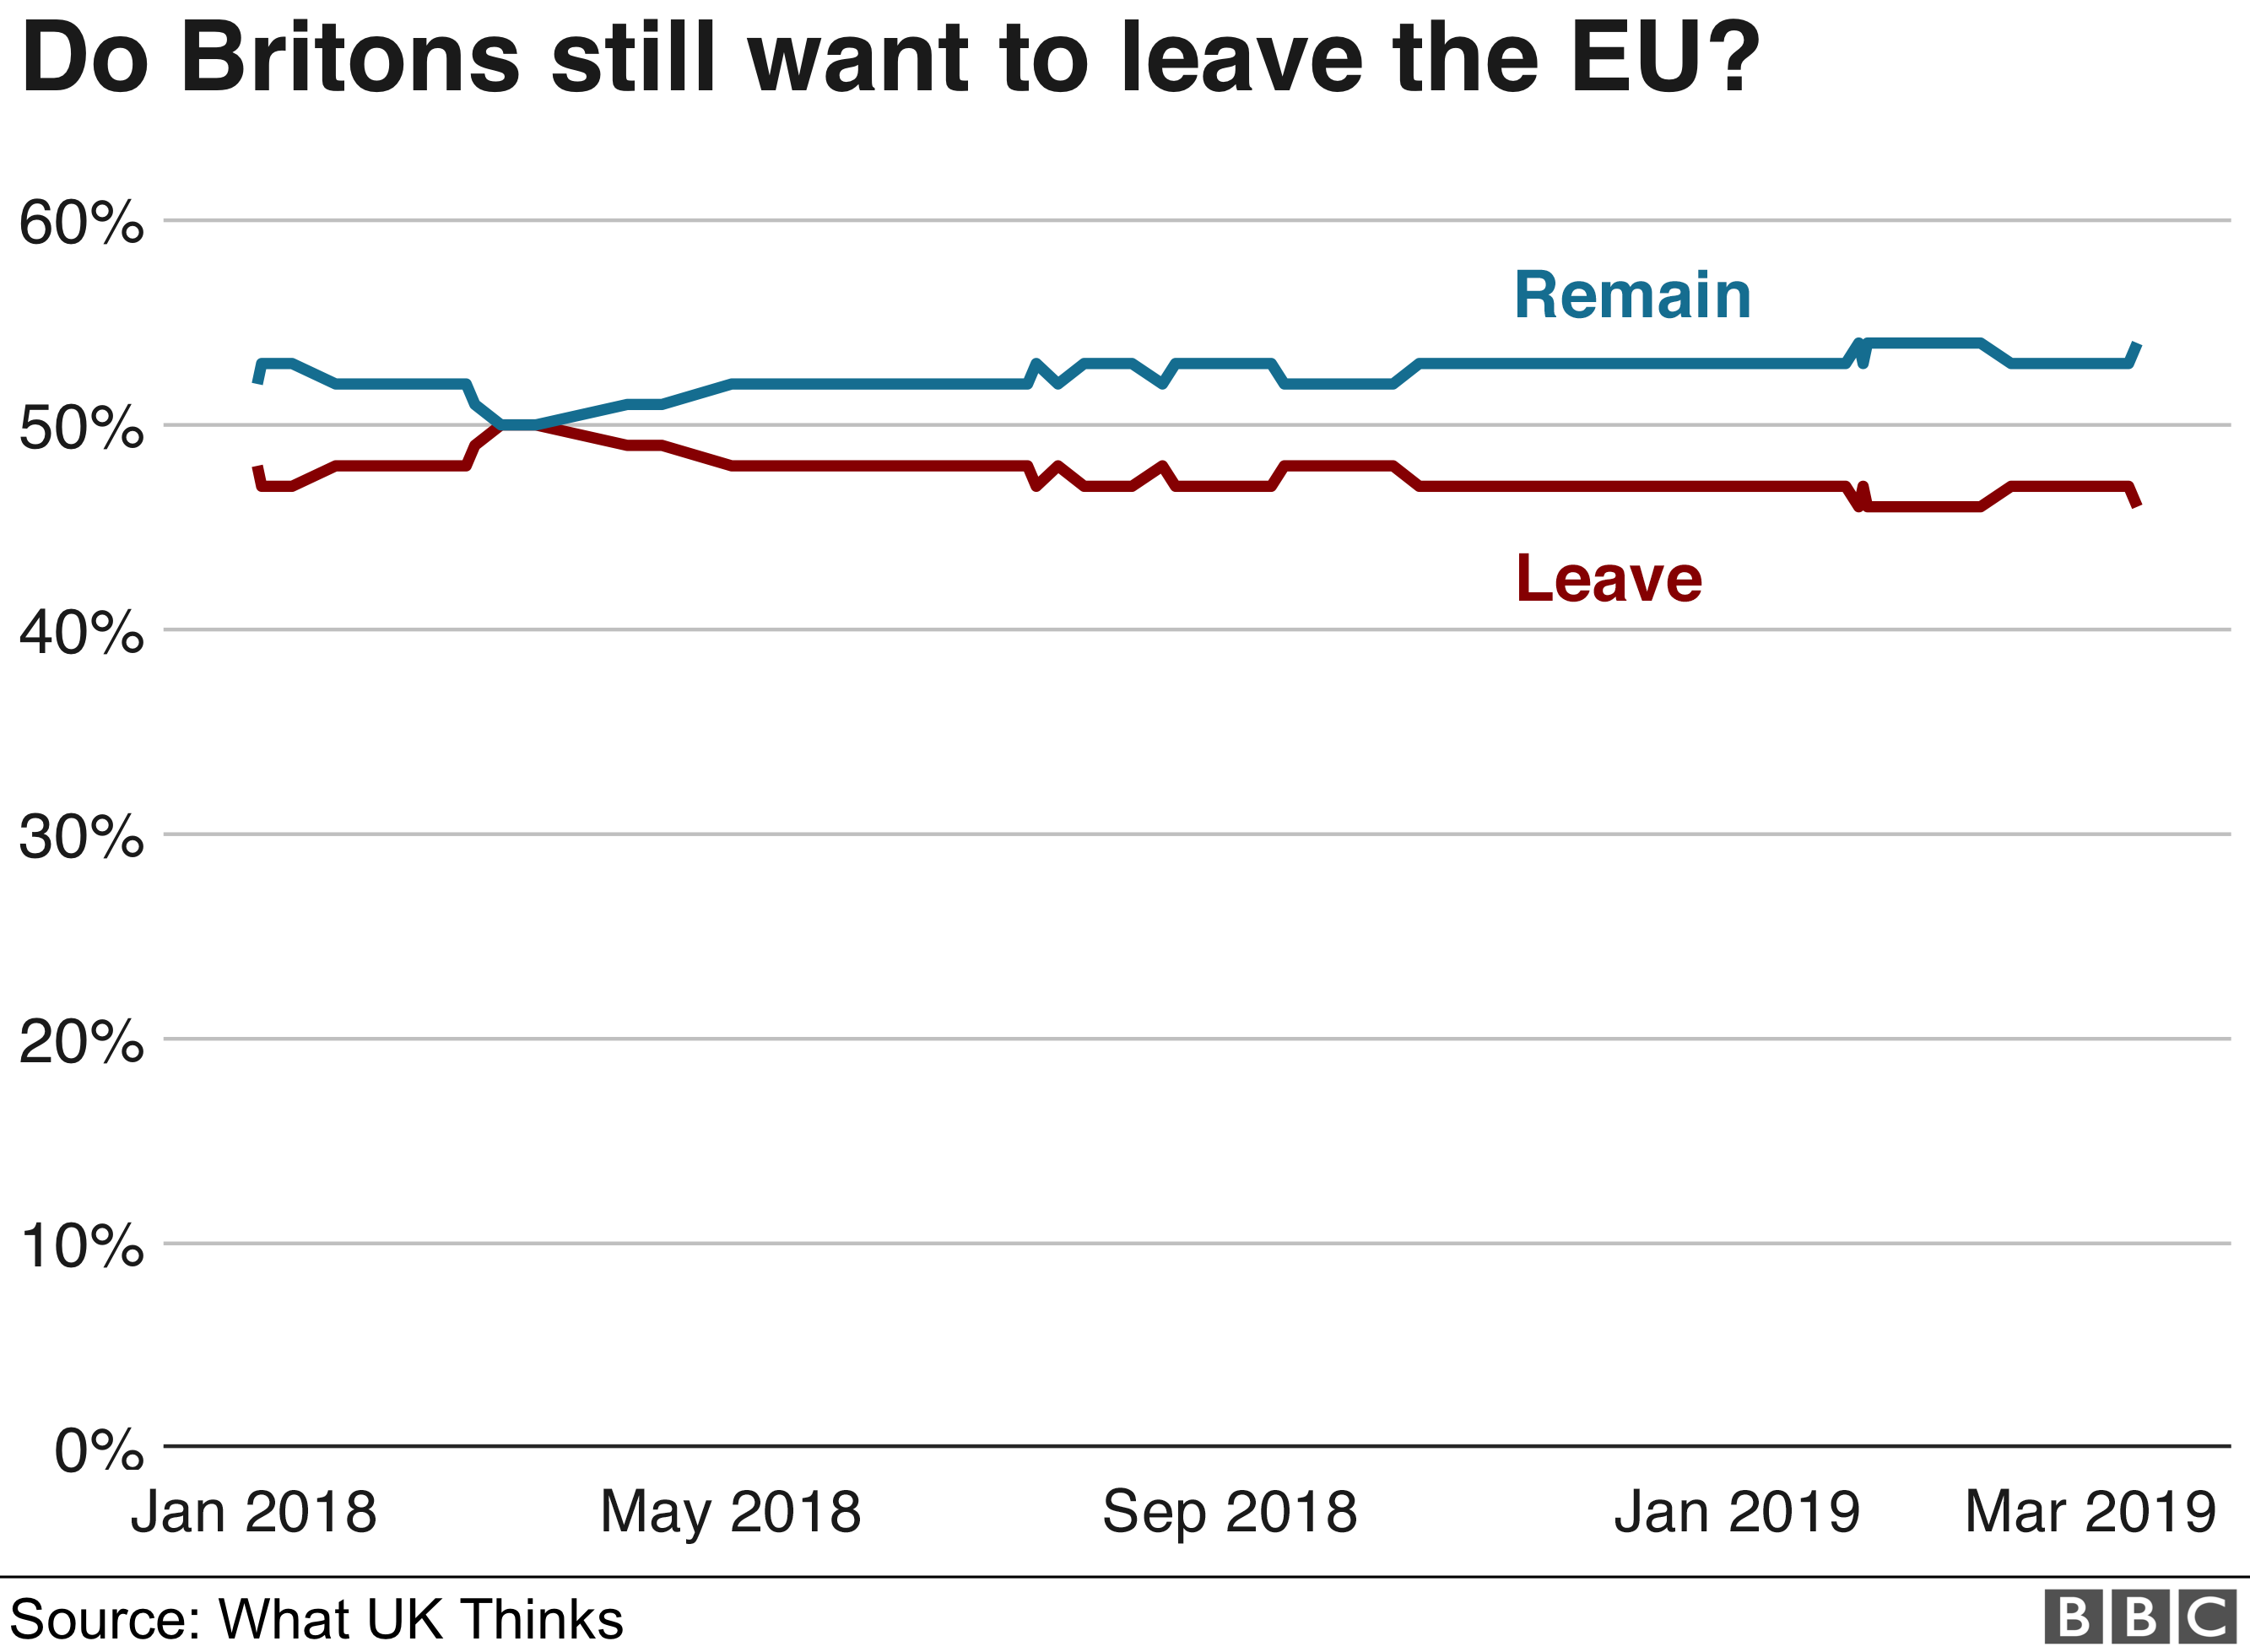 Chart showing support for Remain or Leave